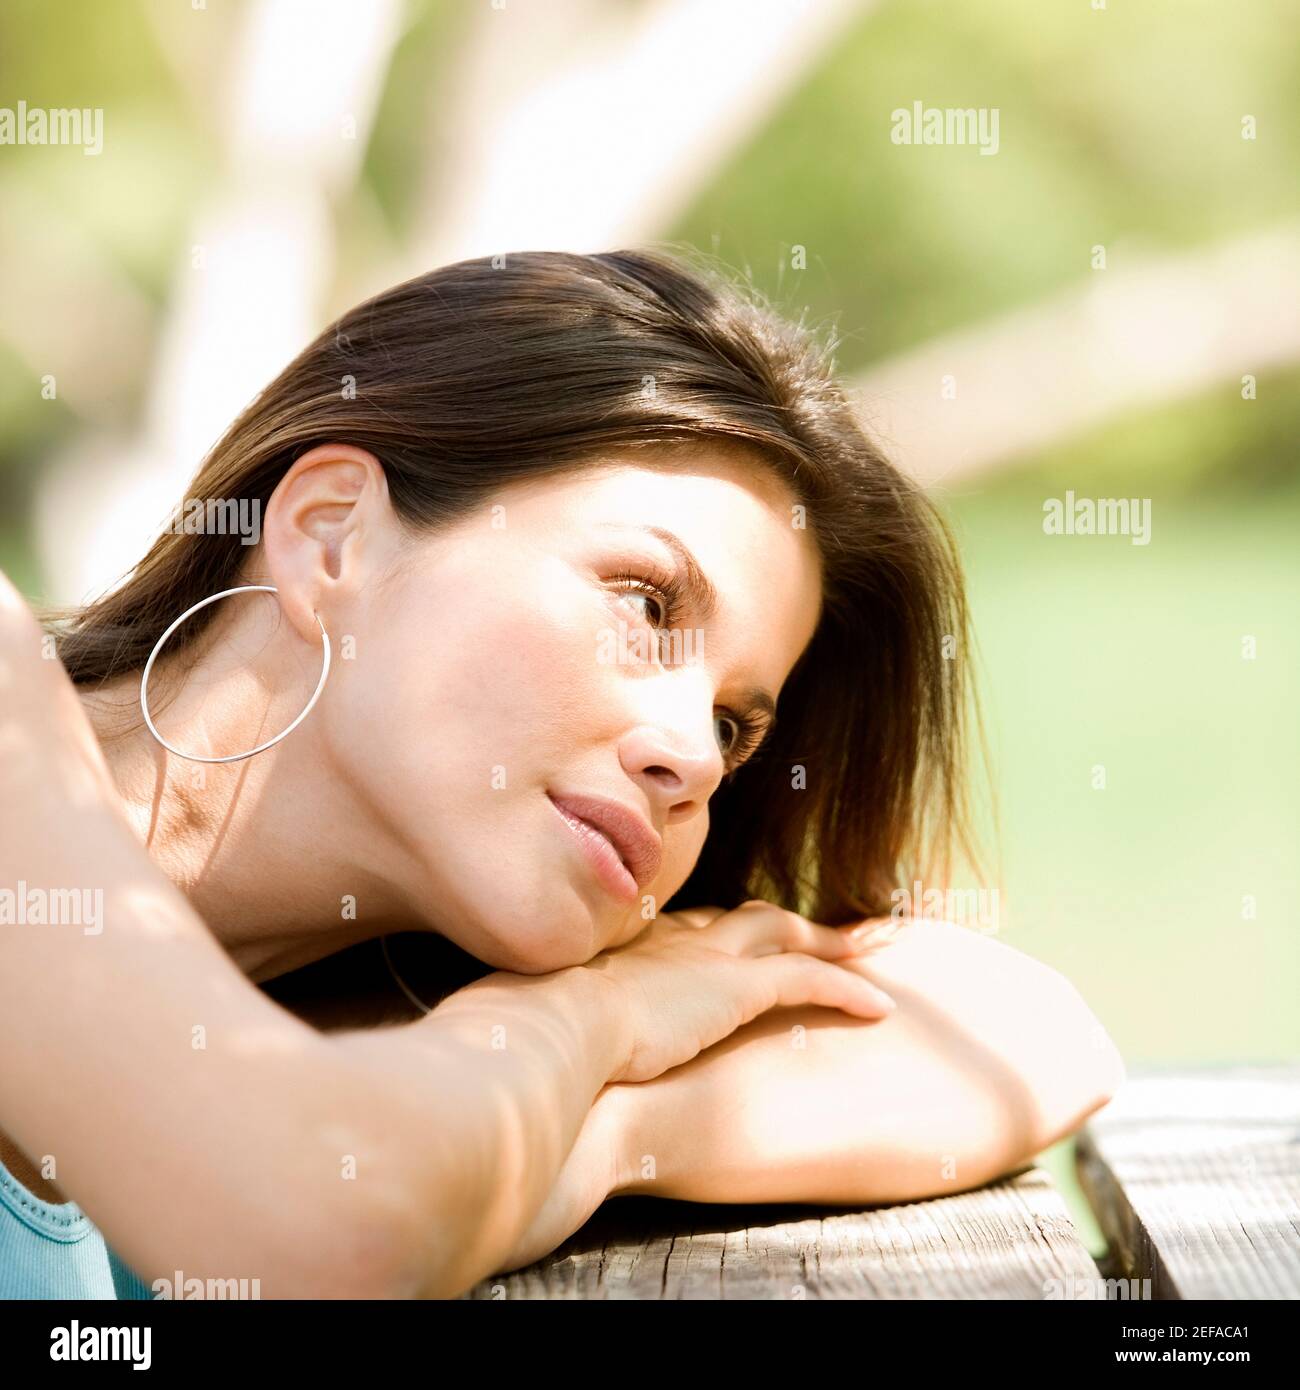 Close-up of a young woman resting on a bench Stock Photo